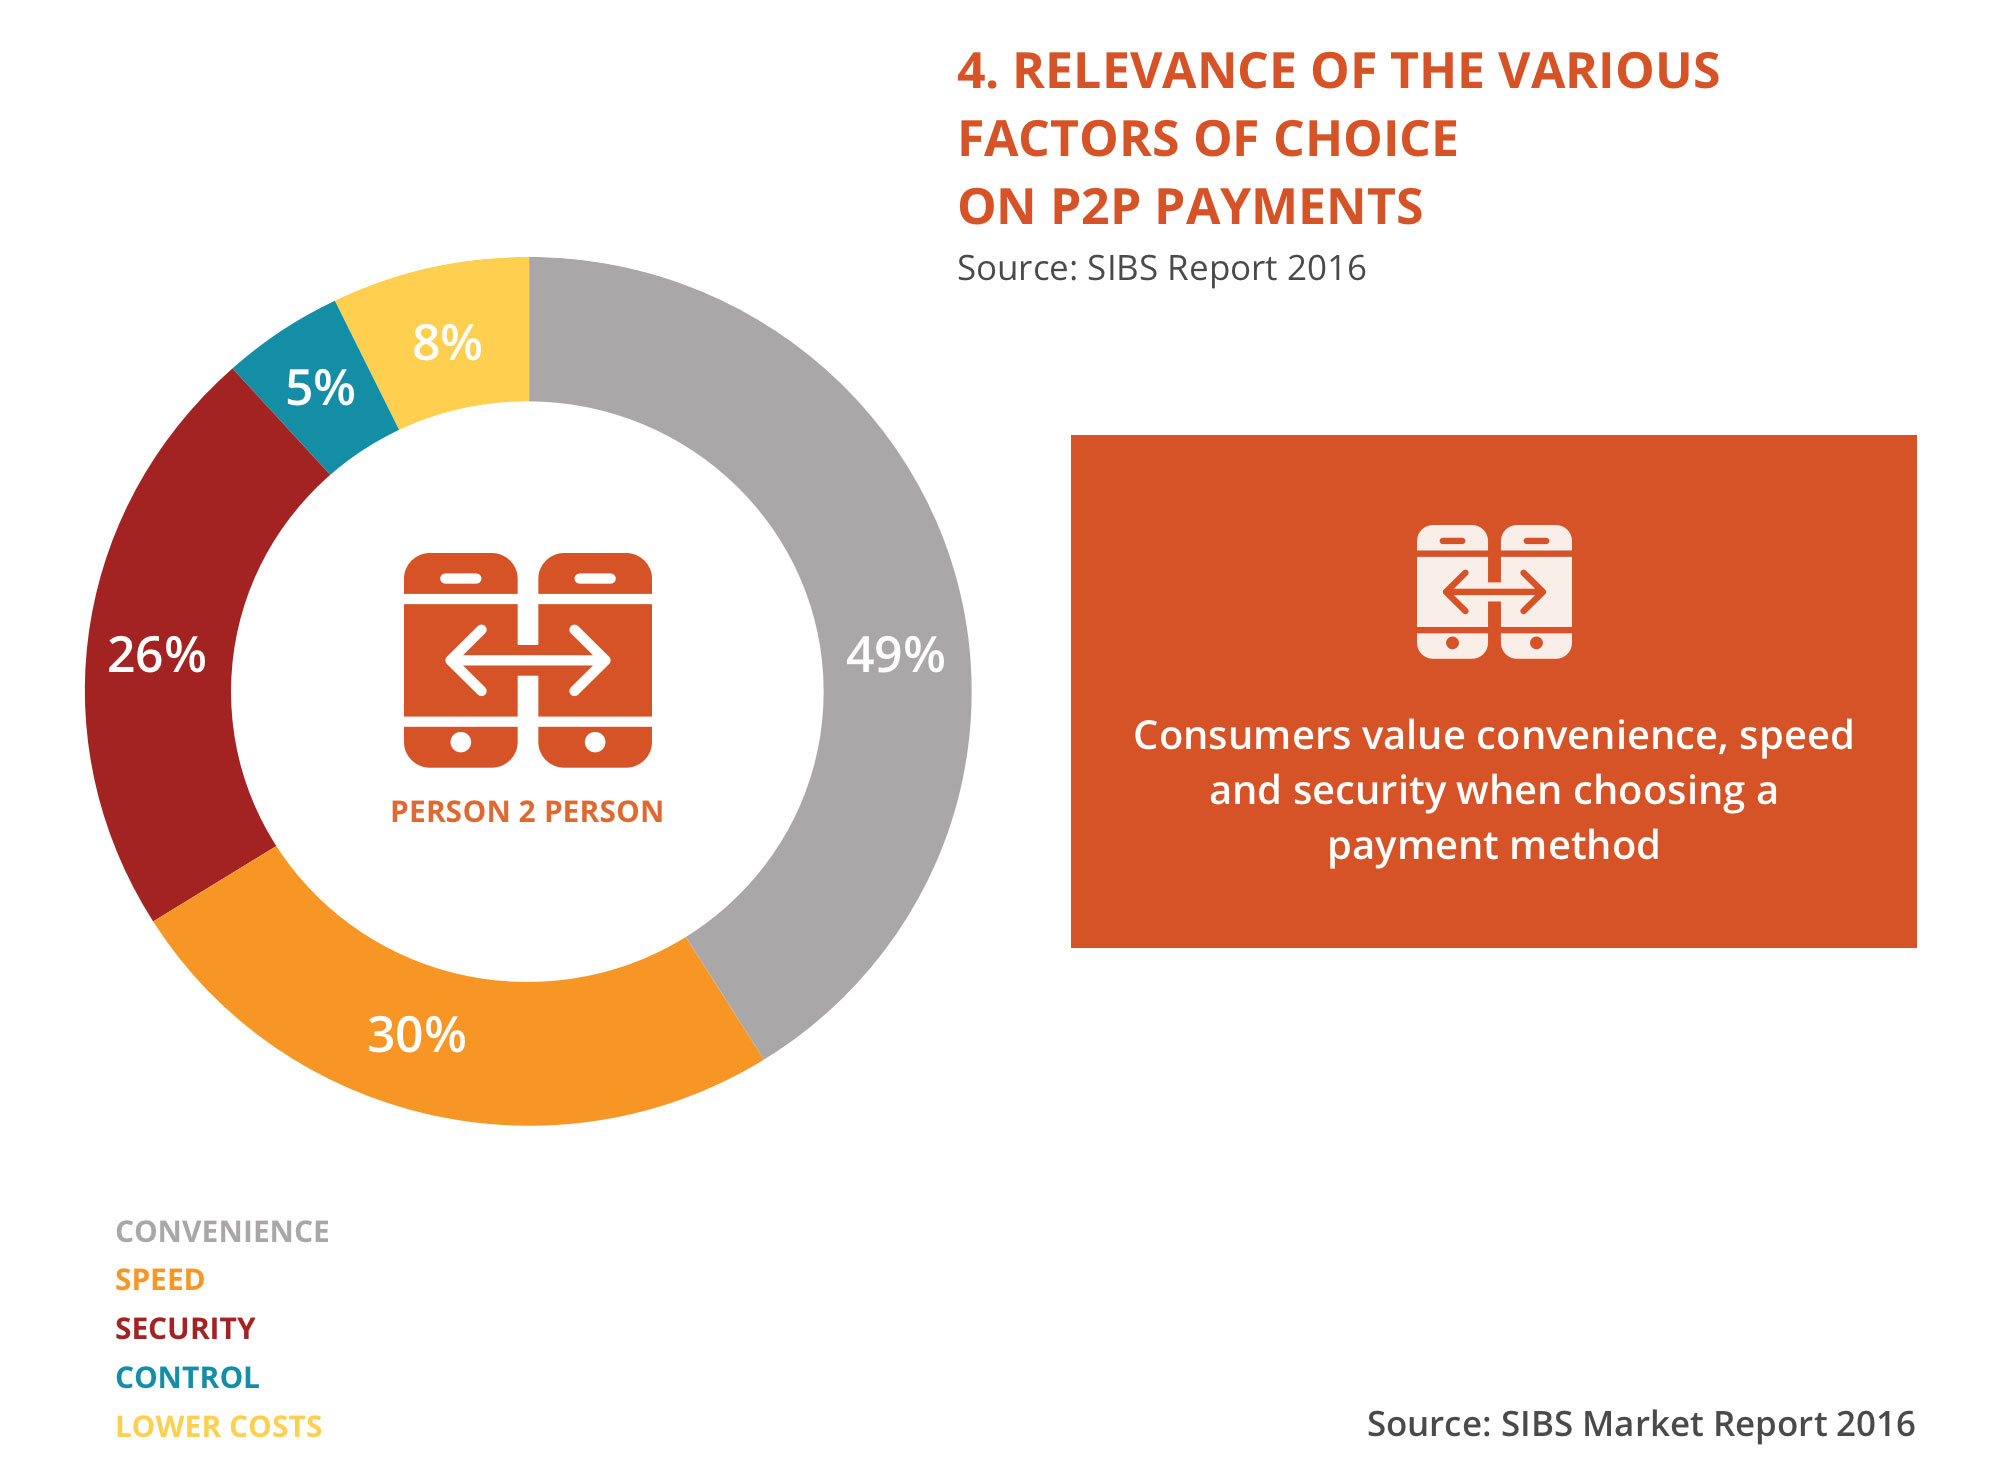 SIBS Market Report — Relevance of the various factors of choice on P2P payments